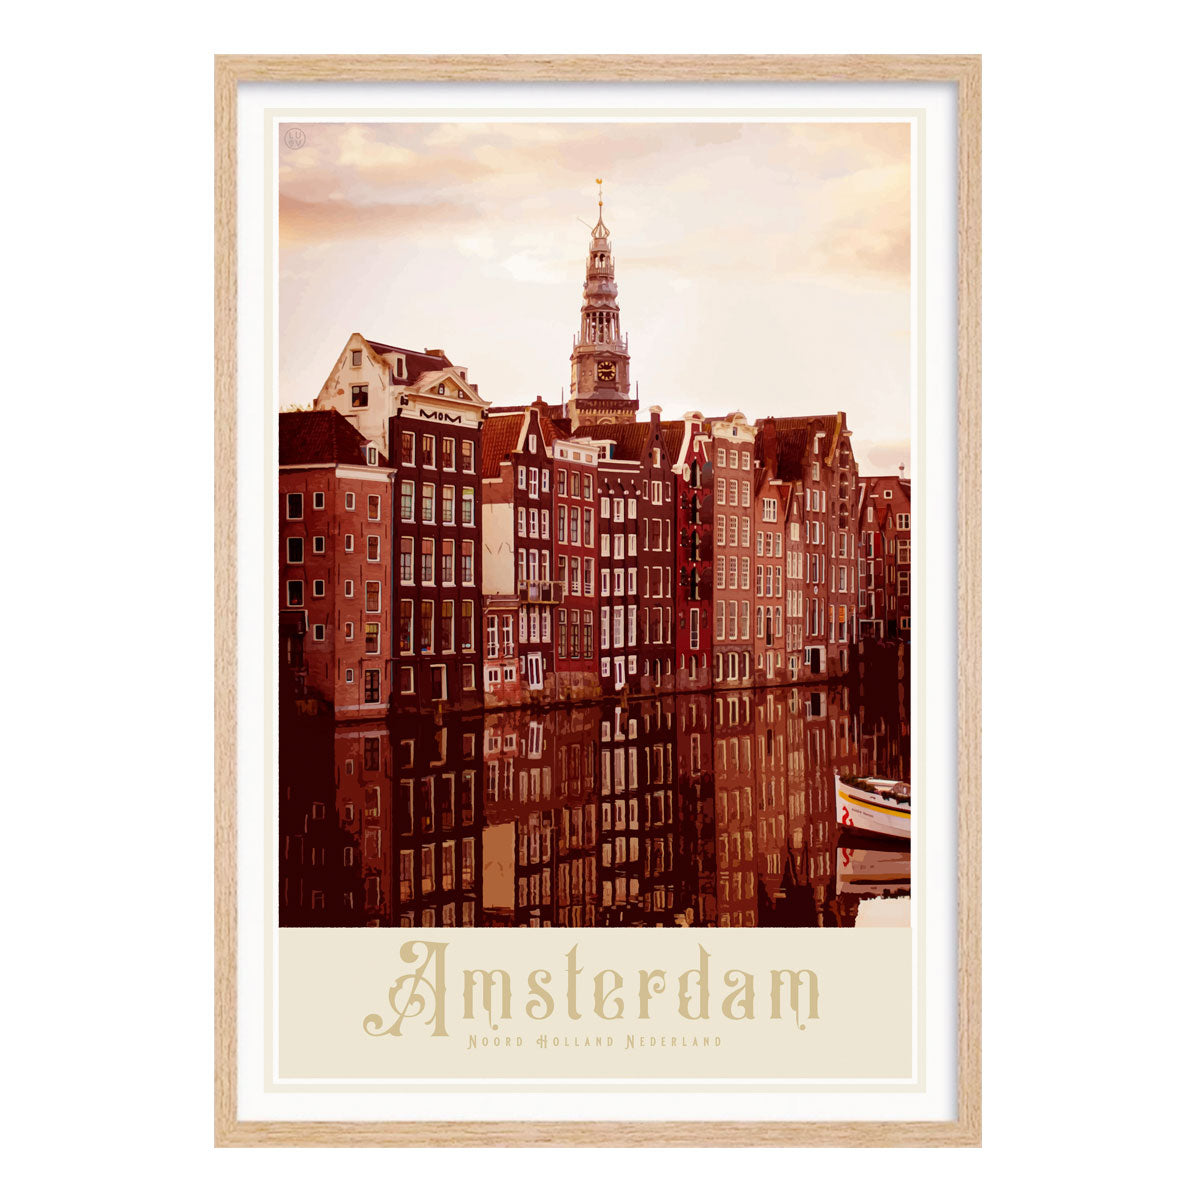 Amsterdam Canal Houses vintage retro poster print in oak frame from Places We Luv